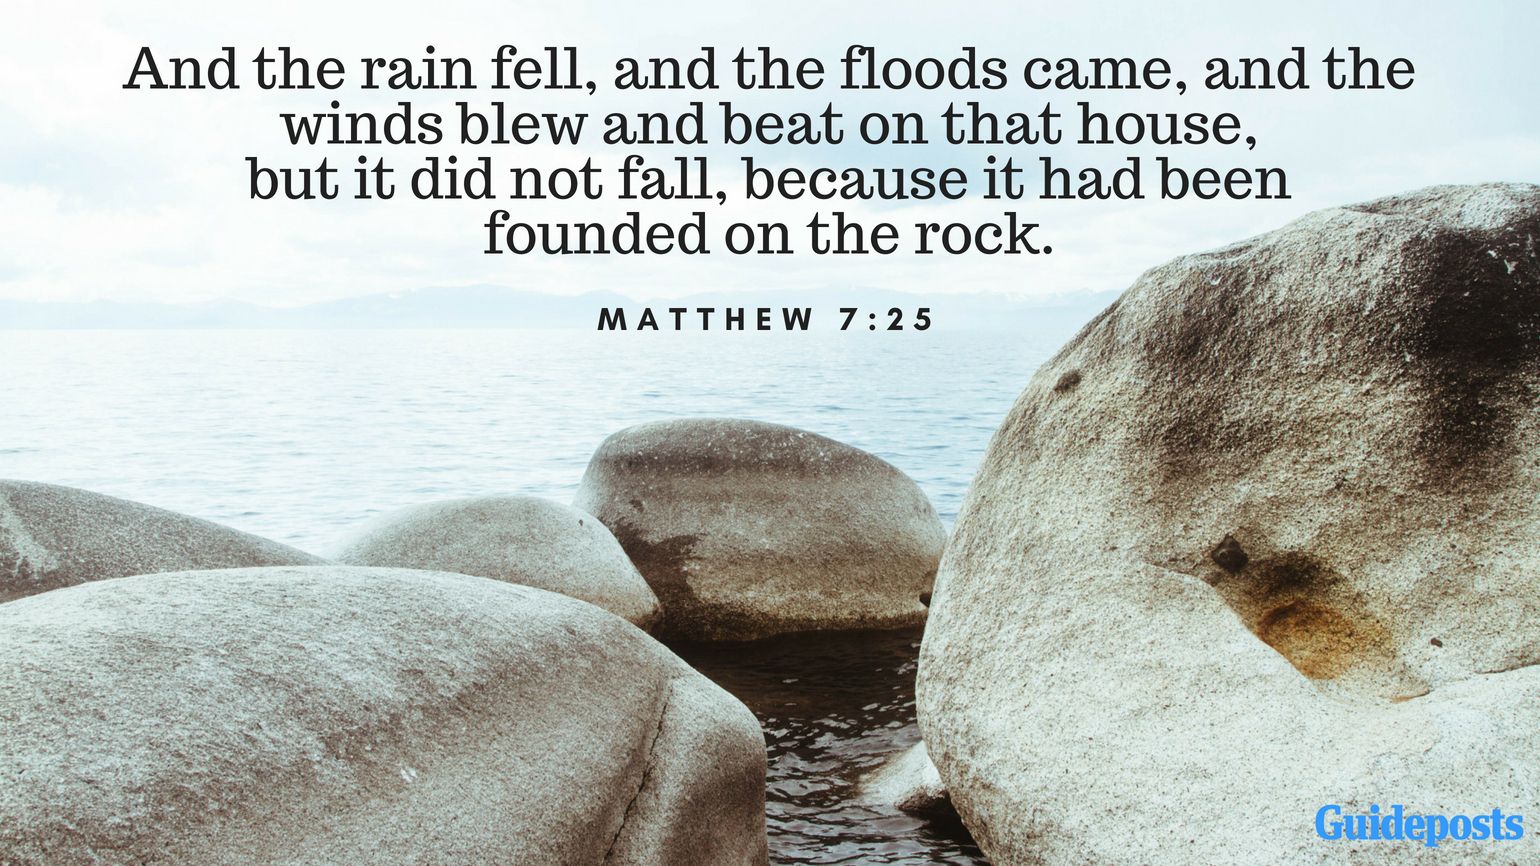 And the rain fell, and the floods came, and the winds blew and beat on that house, but it did not fall, because it had been founded on the rock. Matthew 7:25